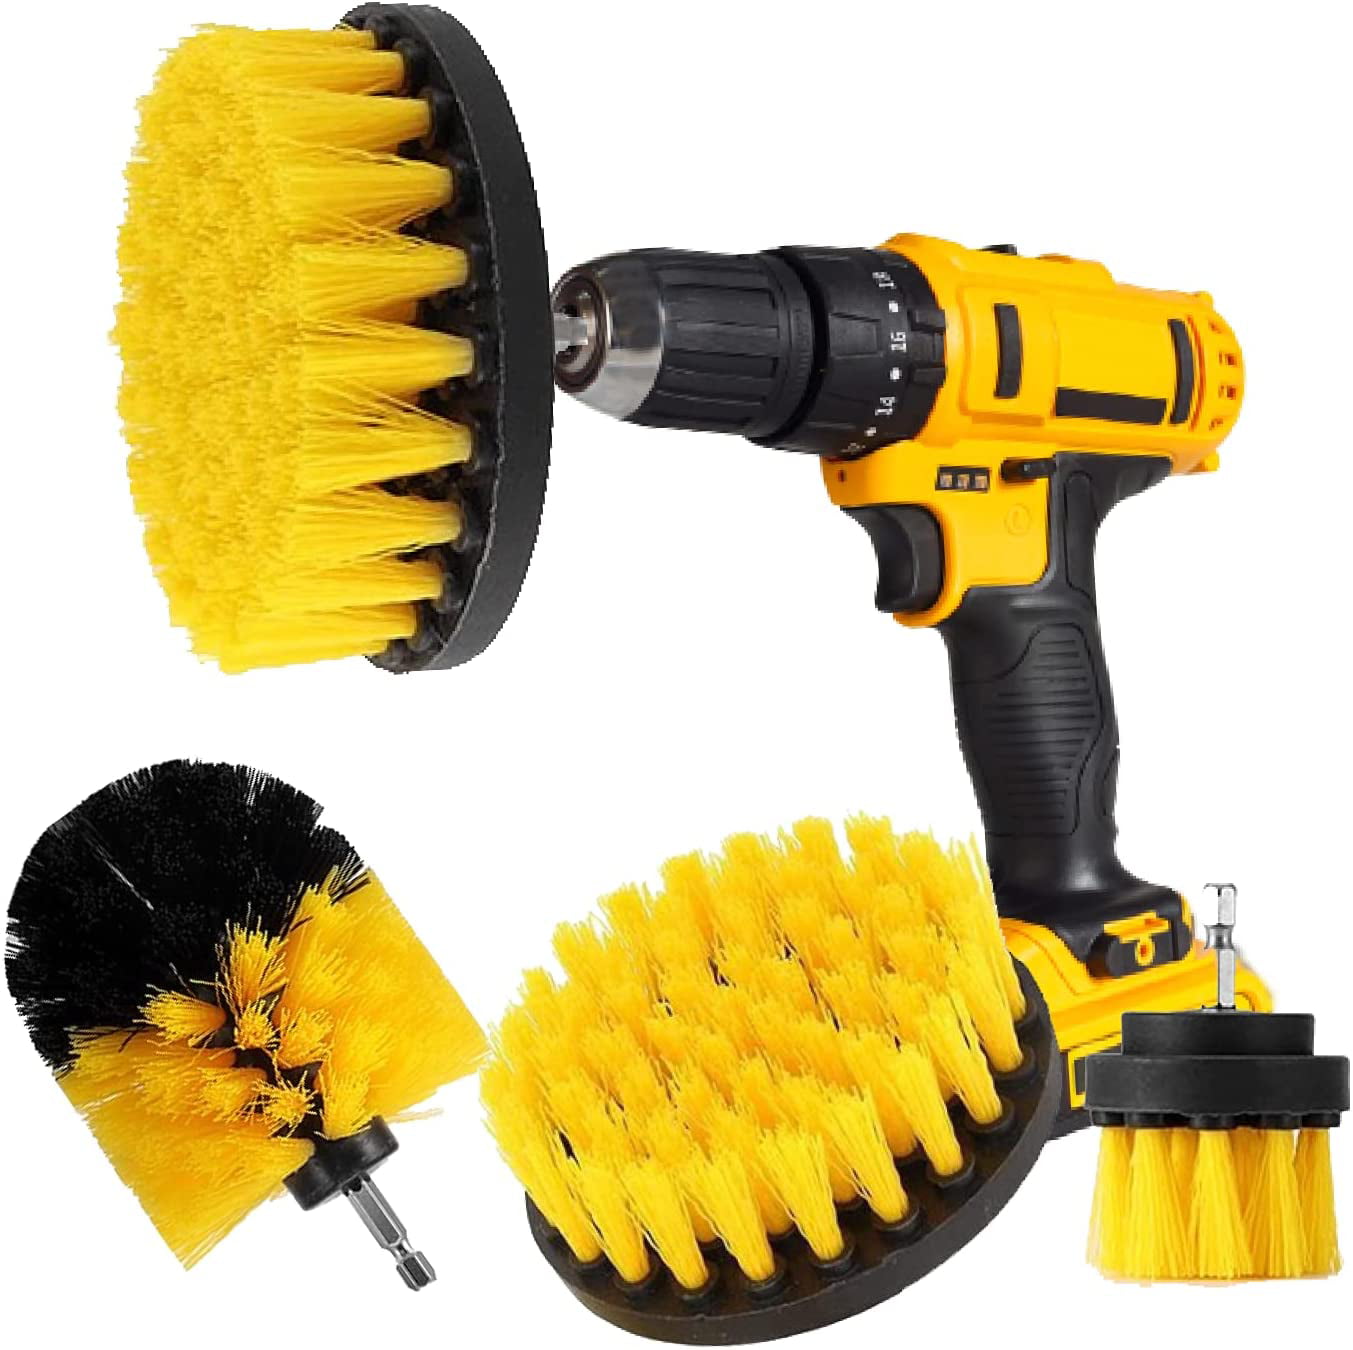 3 pcs Tile Grout Drill Brush Power Scrub Cleaning Tub Cleaner Attachment Kit 